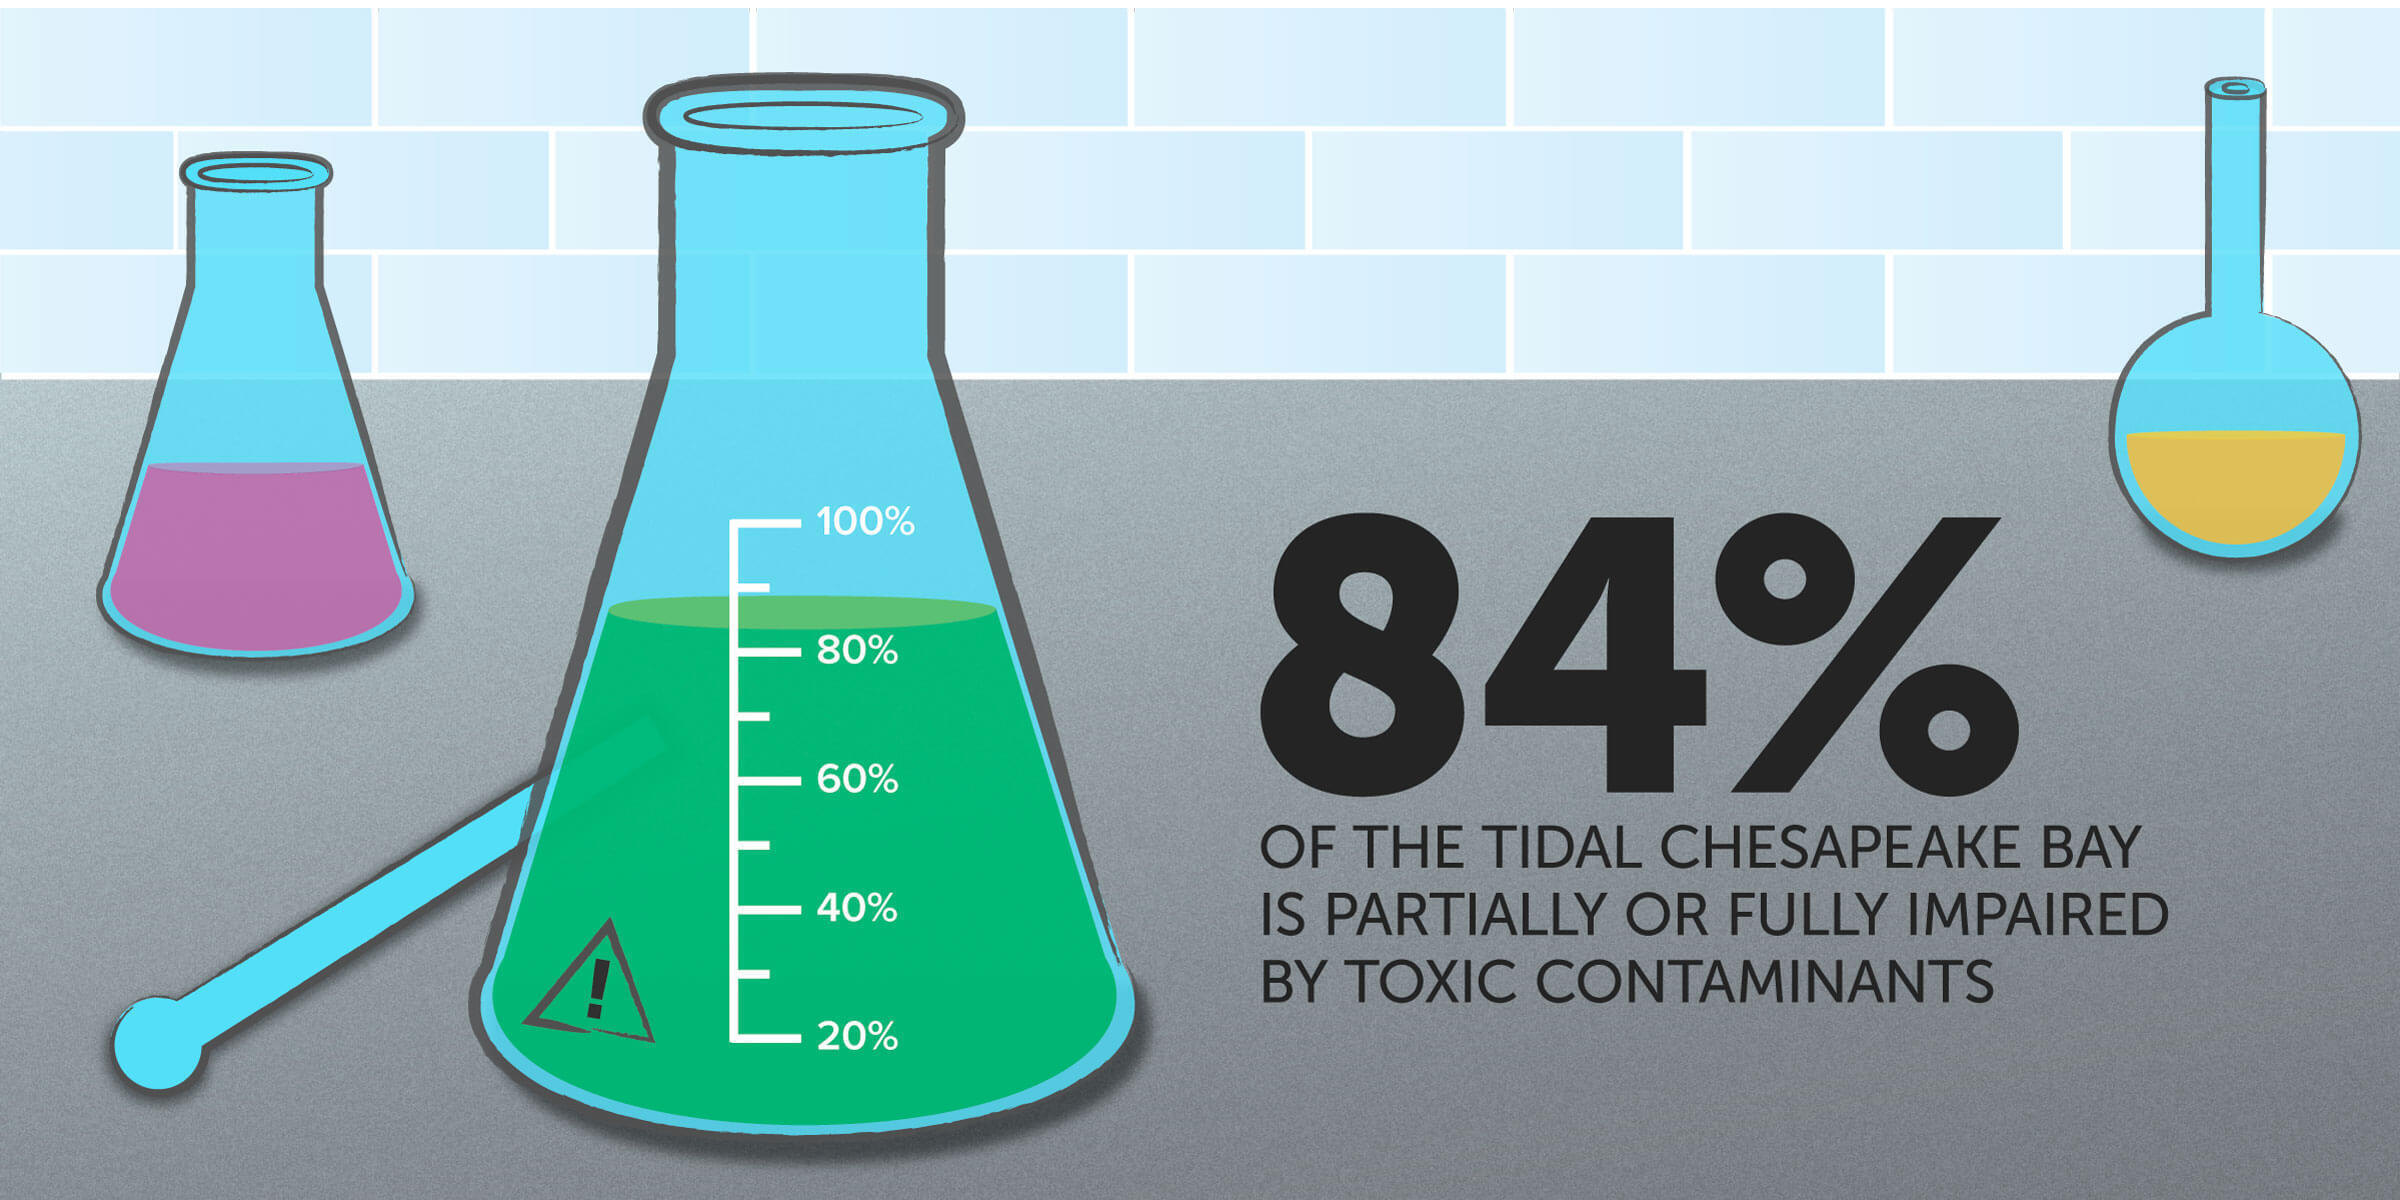 82% of the tidal Chesapeake Bay is partially or fully impaired by toxic contaminants